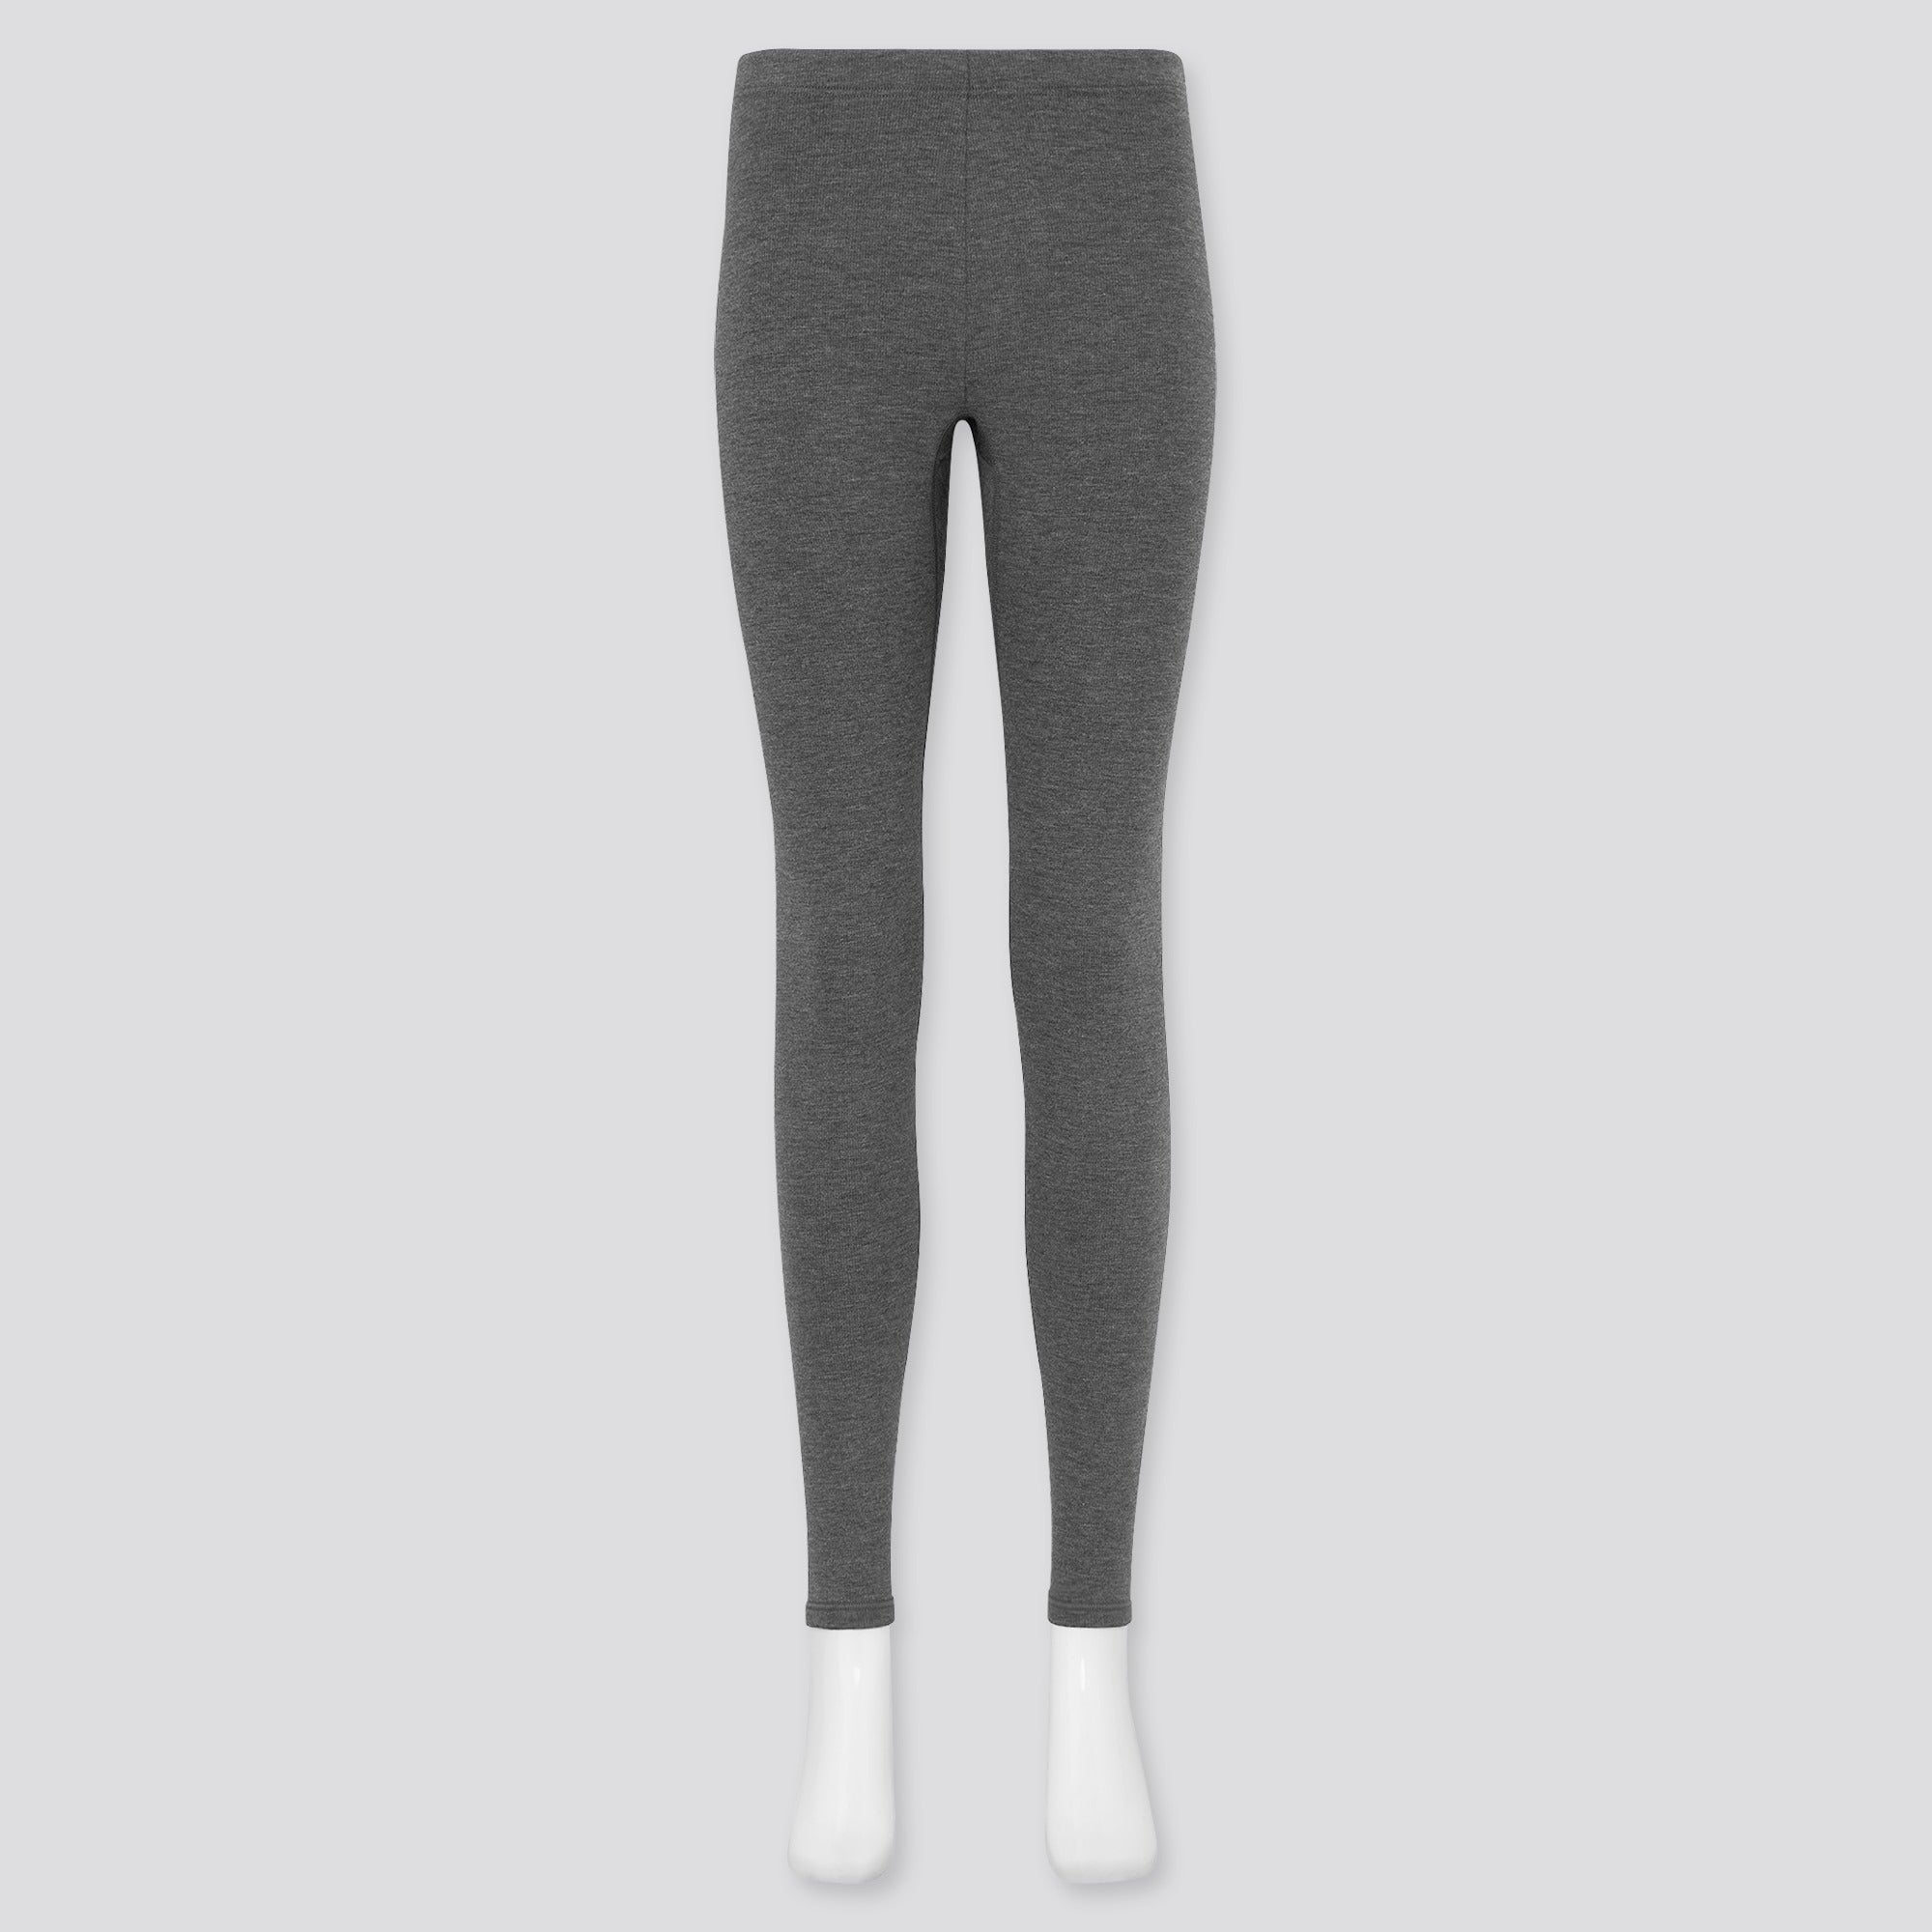 Uniqlo Philippines - These comfortable pants look like jeans and fit like  leggings. The soft stretch fabric features a faded texture with authentic  whiskering. P1,290 more color choices here: http://www.uniqlo.com/ph/CPaGoods/itemcode=079695  | Facebook